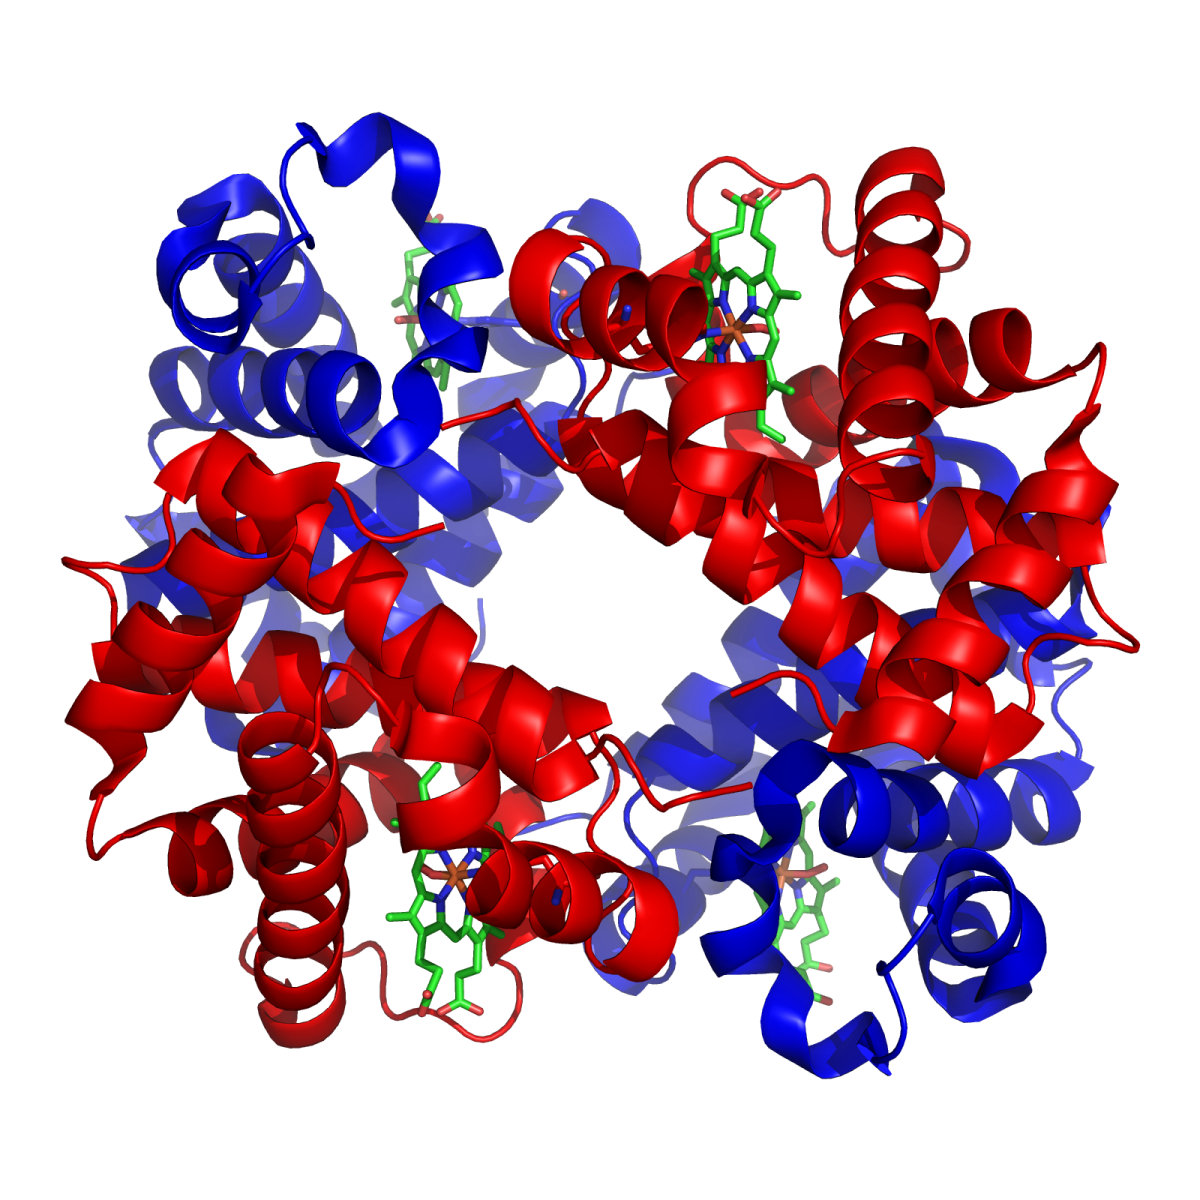 Structure protein primary of The Structure